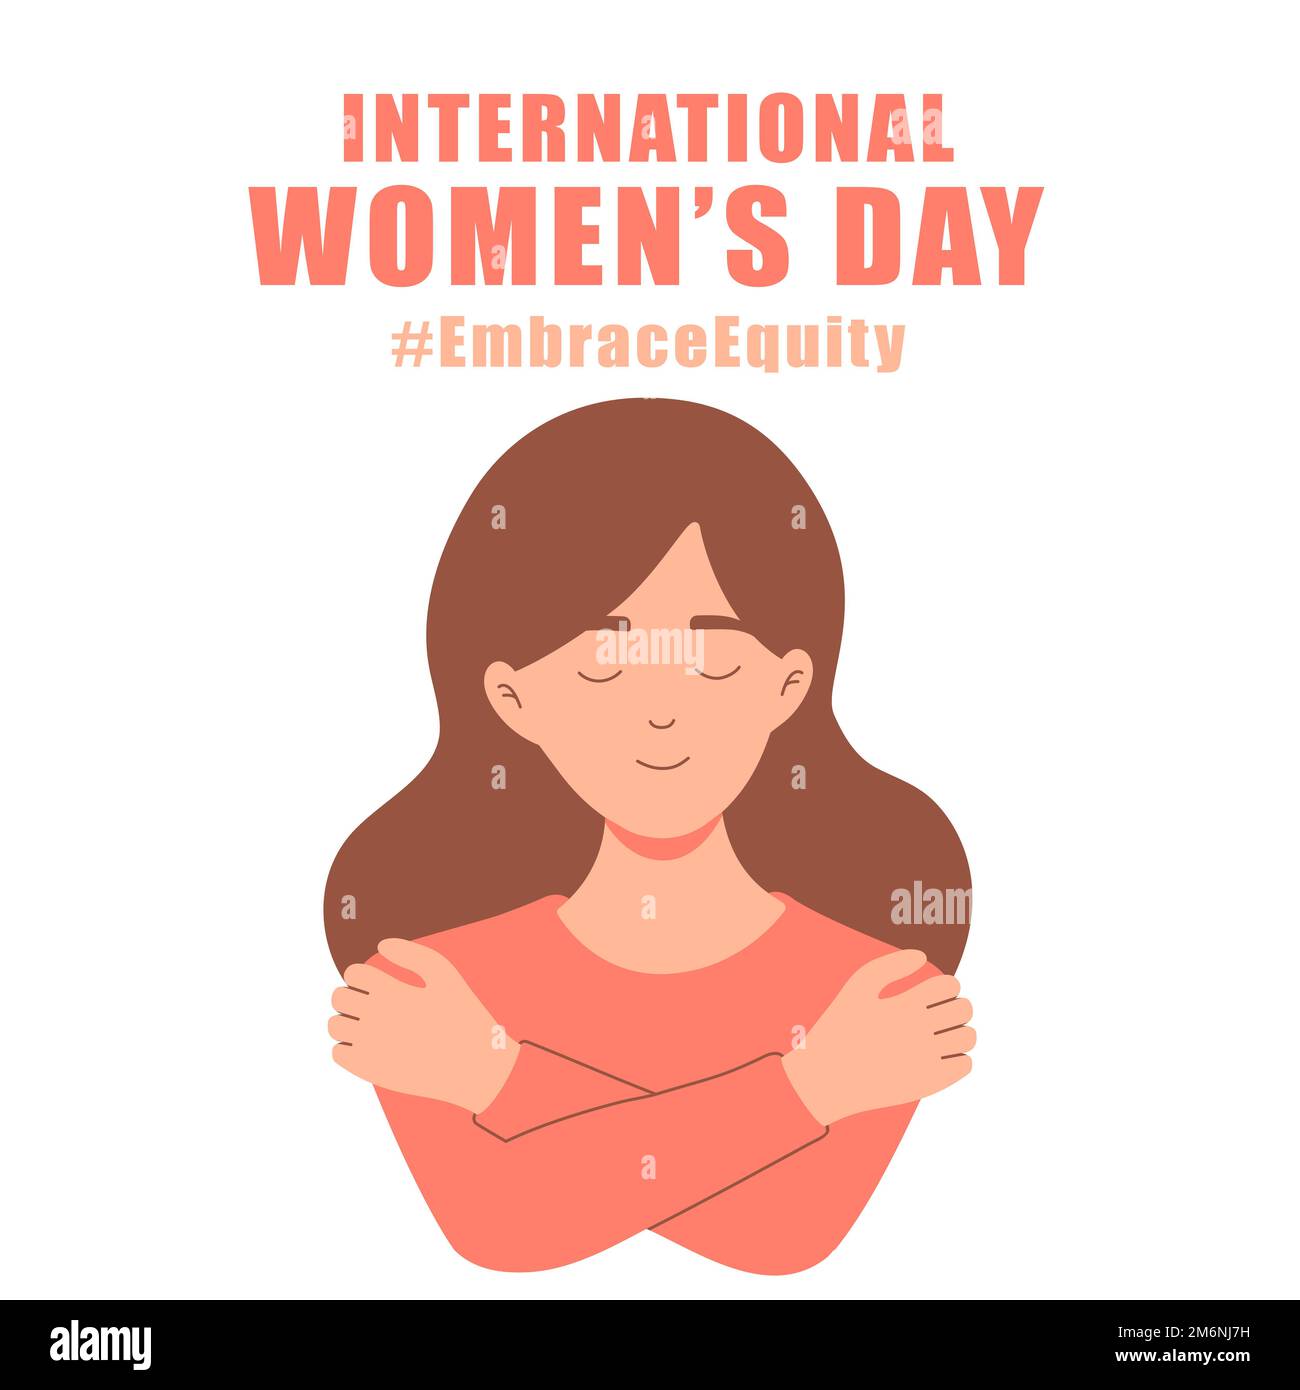 International womens day concept poster. Embrace equity woman illustration background. 2023 women day campaign theme - EmbraceEquity Stock Vector